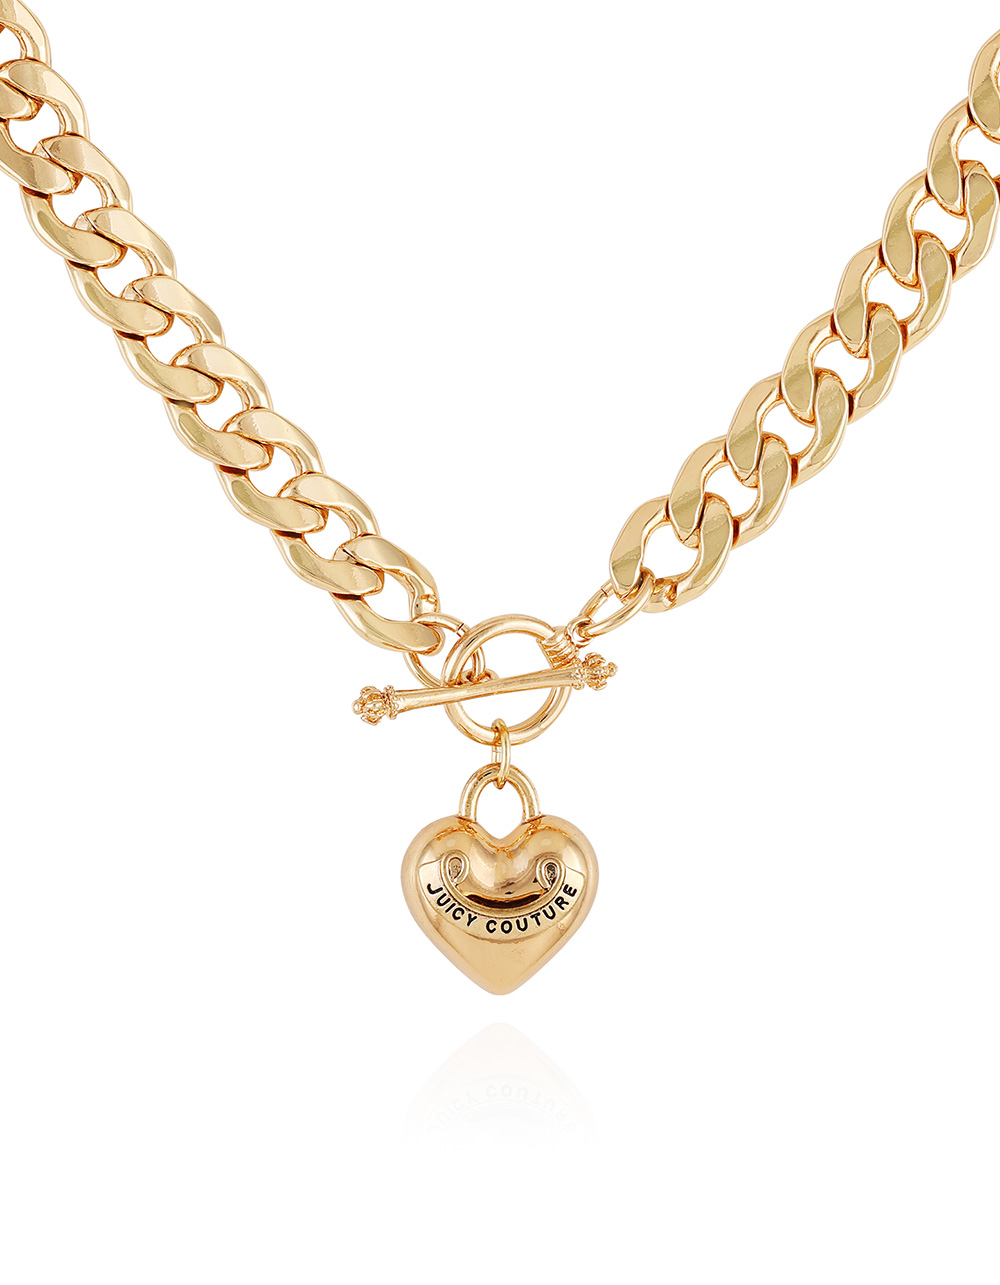 Juicy Couture Black Label Juicy Couture Gold-Tone and Pavé Starter  Necklace, 16L